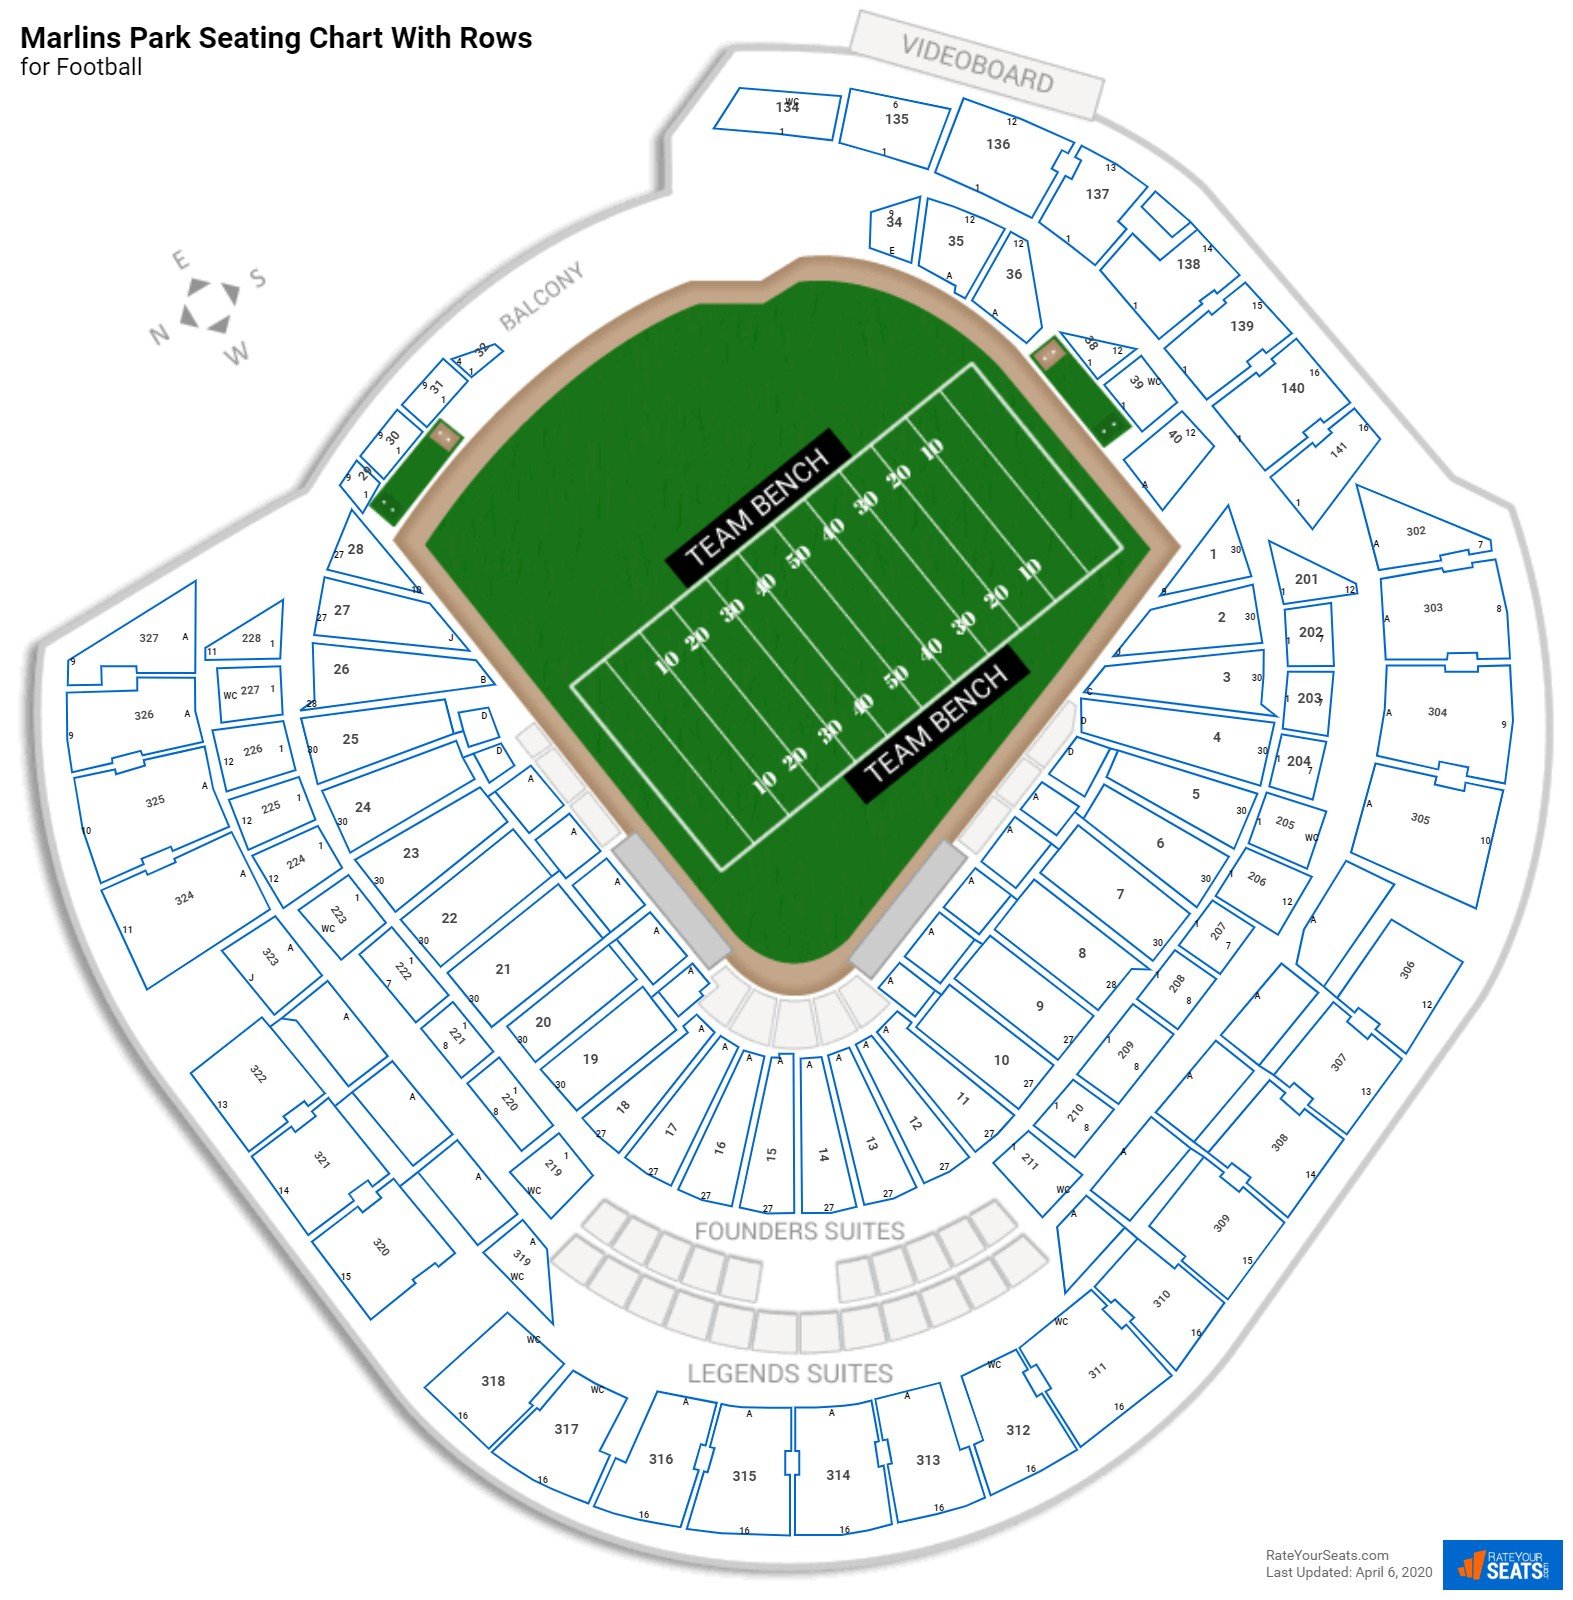 Marlins Park Seating Charts for Football - RateYourSeats.com